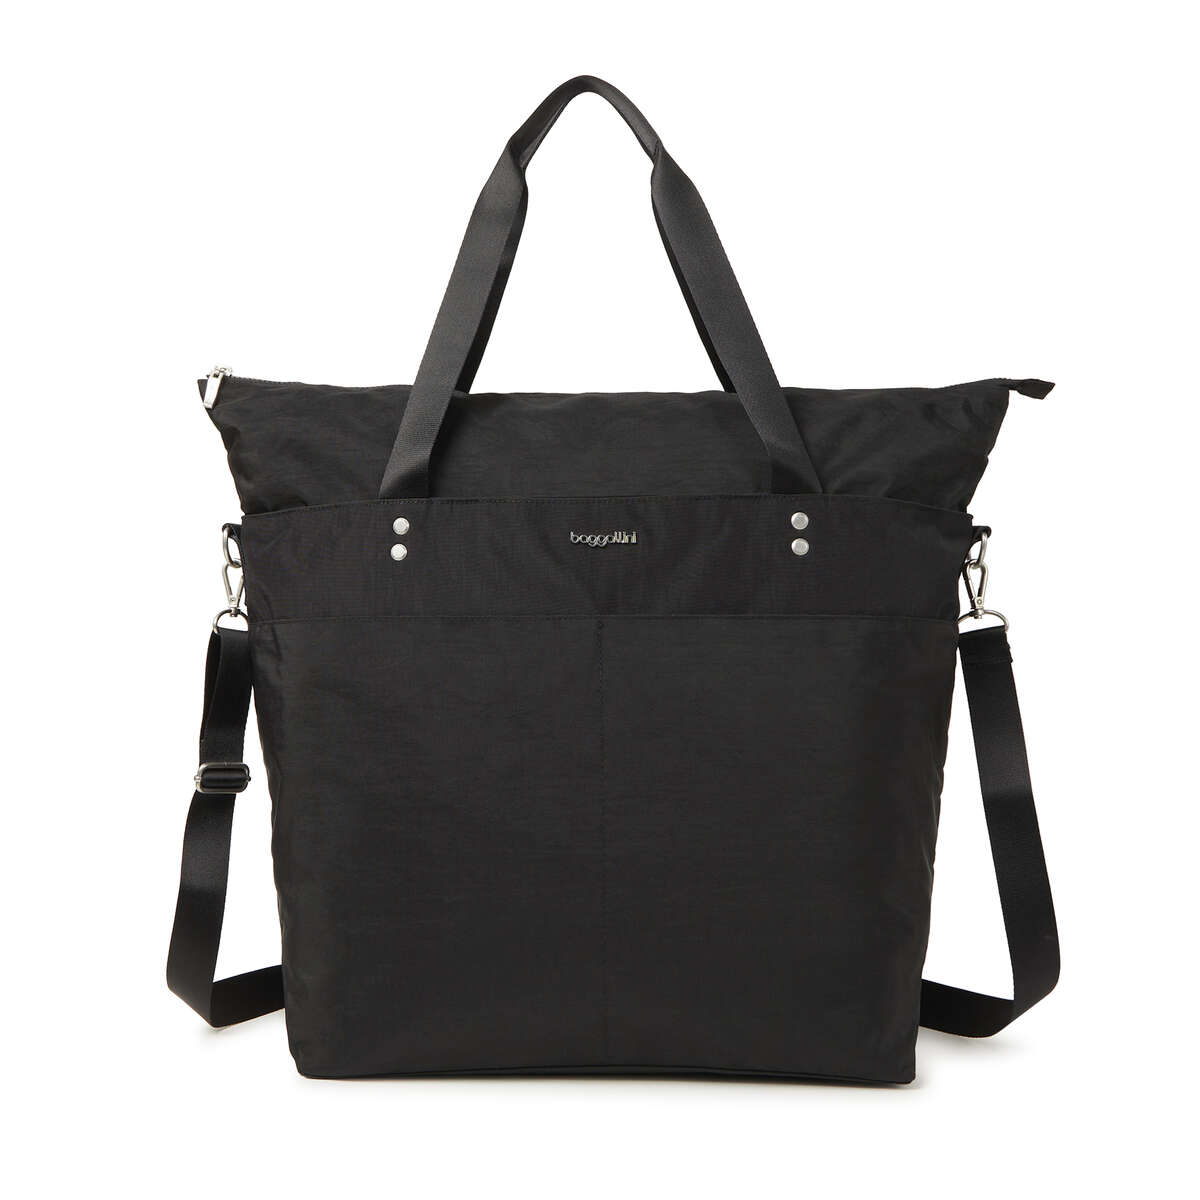 Baggallini Large Carryall tote - Black - Irv’s Luggage